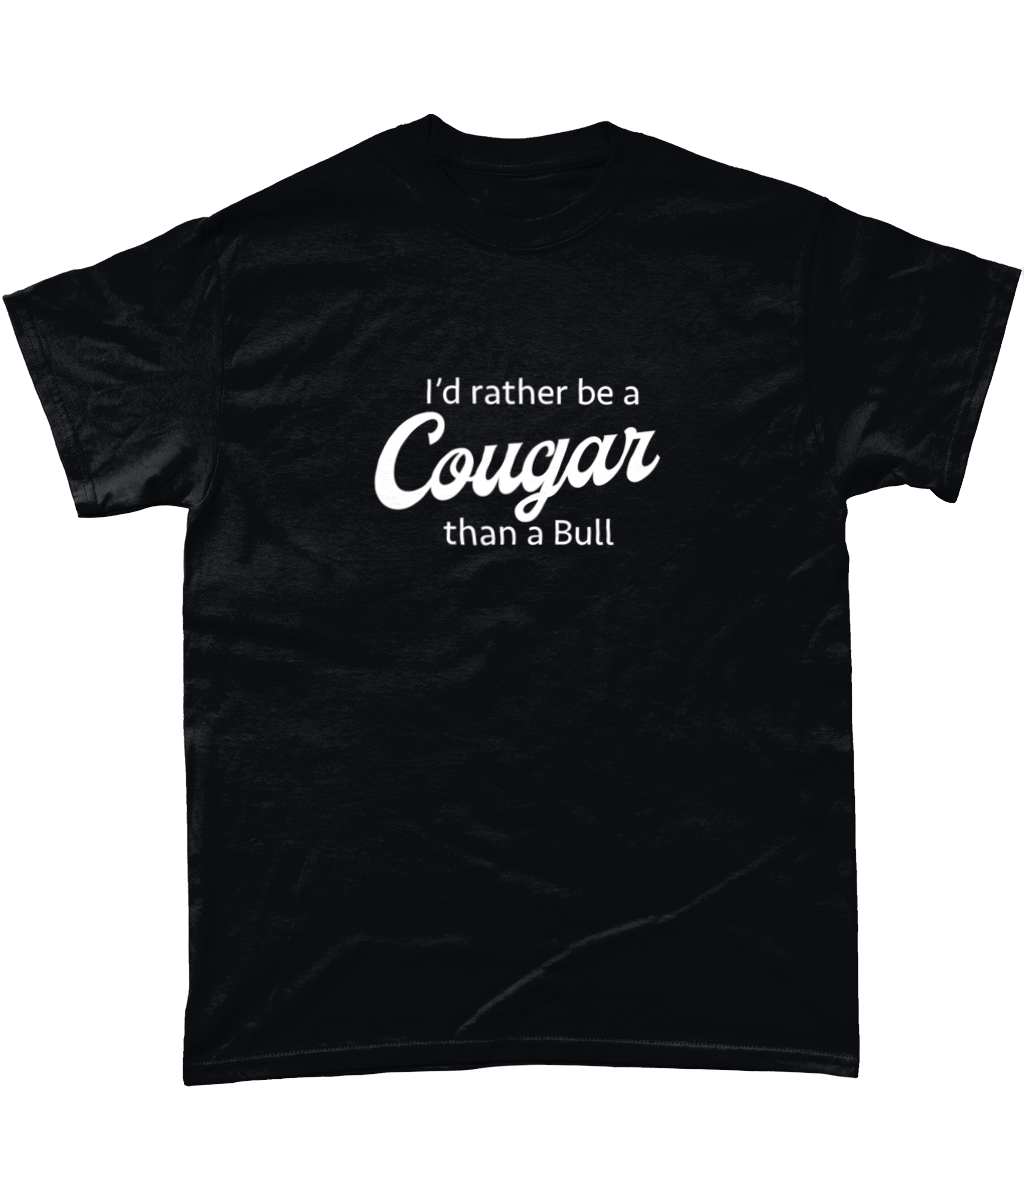 Keighley Cougars 'Rather be a Cougar' T-Shirt in Black